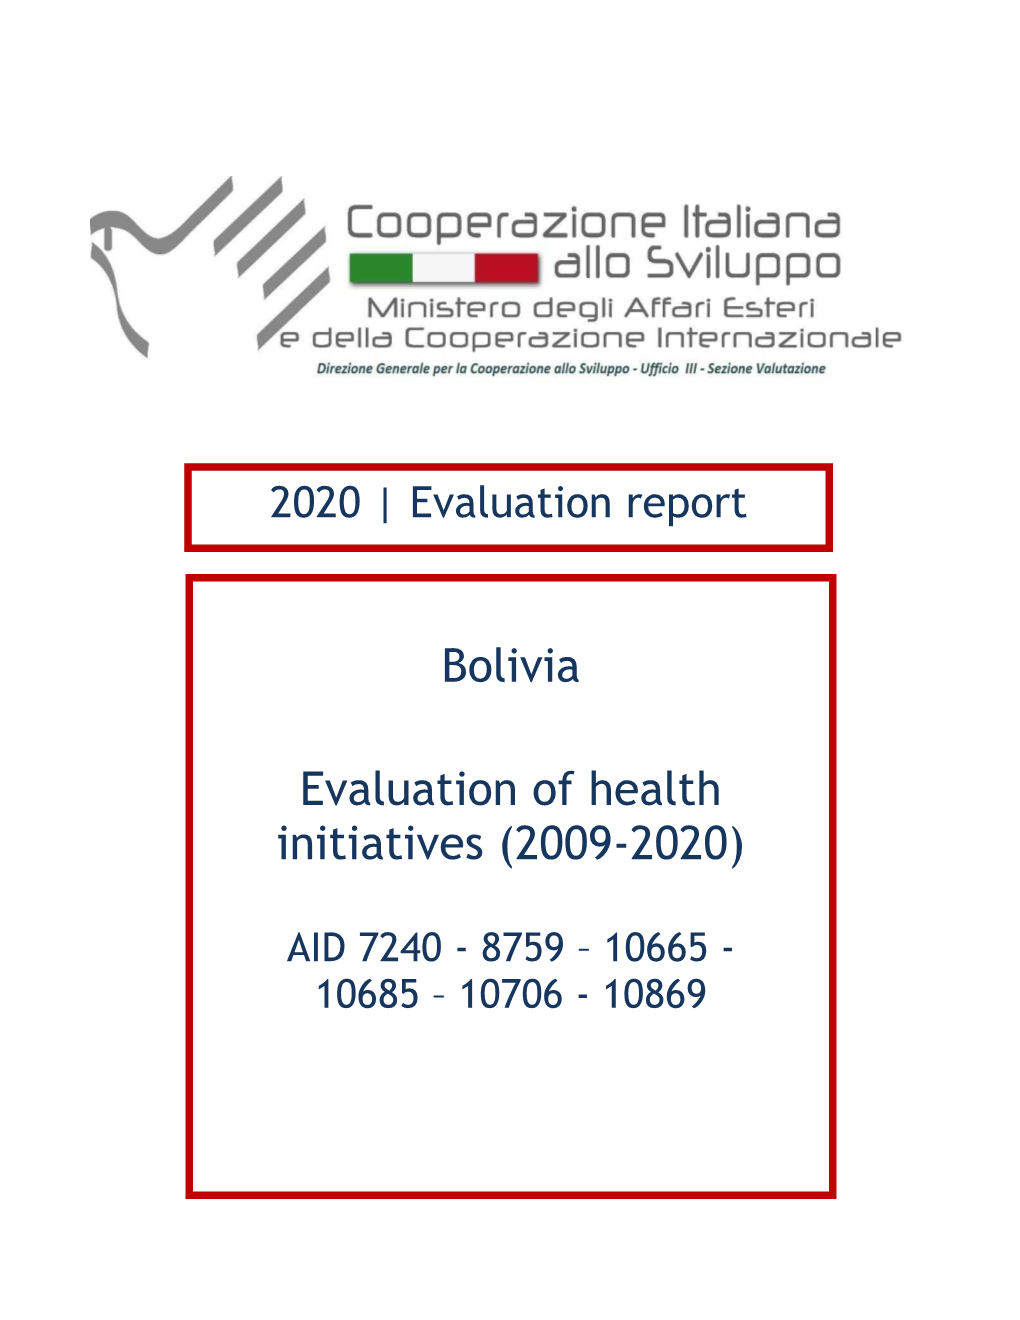 Evaluation of Health Initiatives in Bolivia